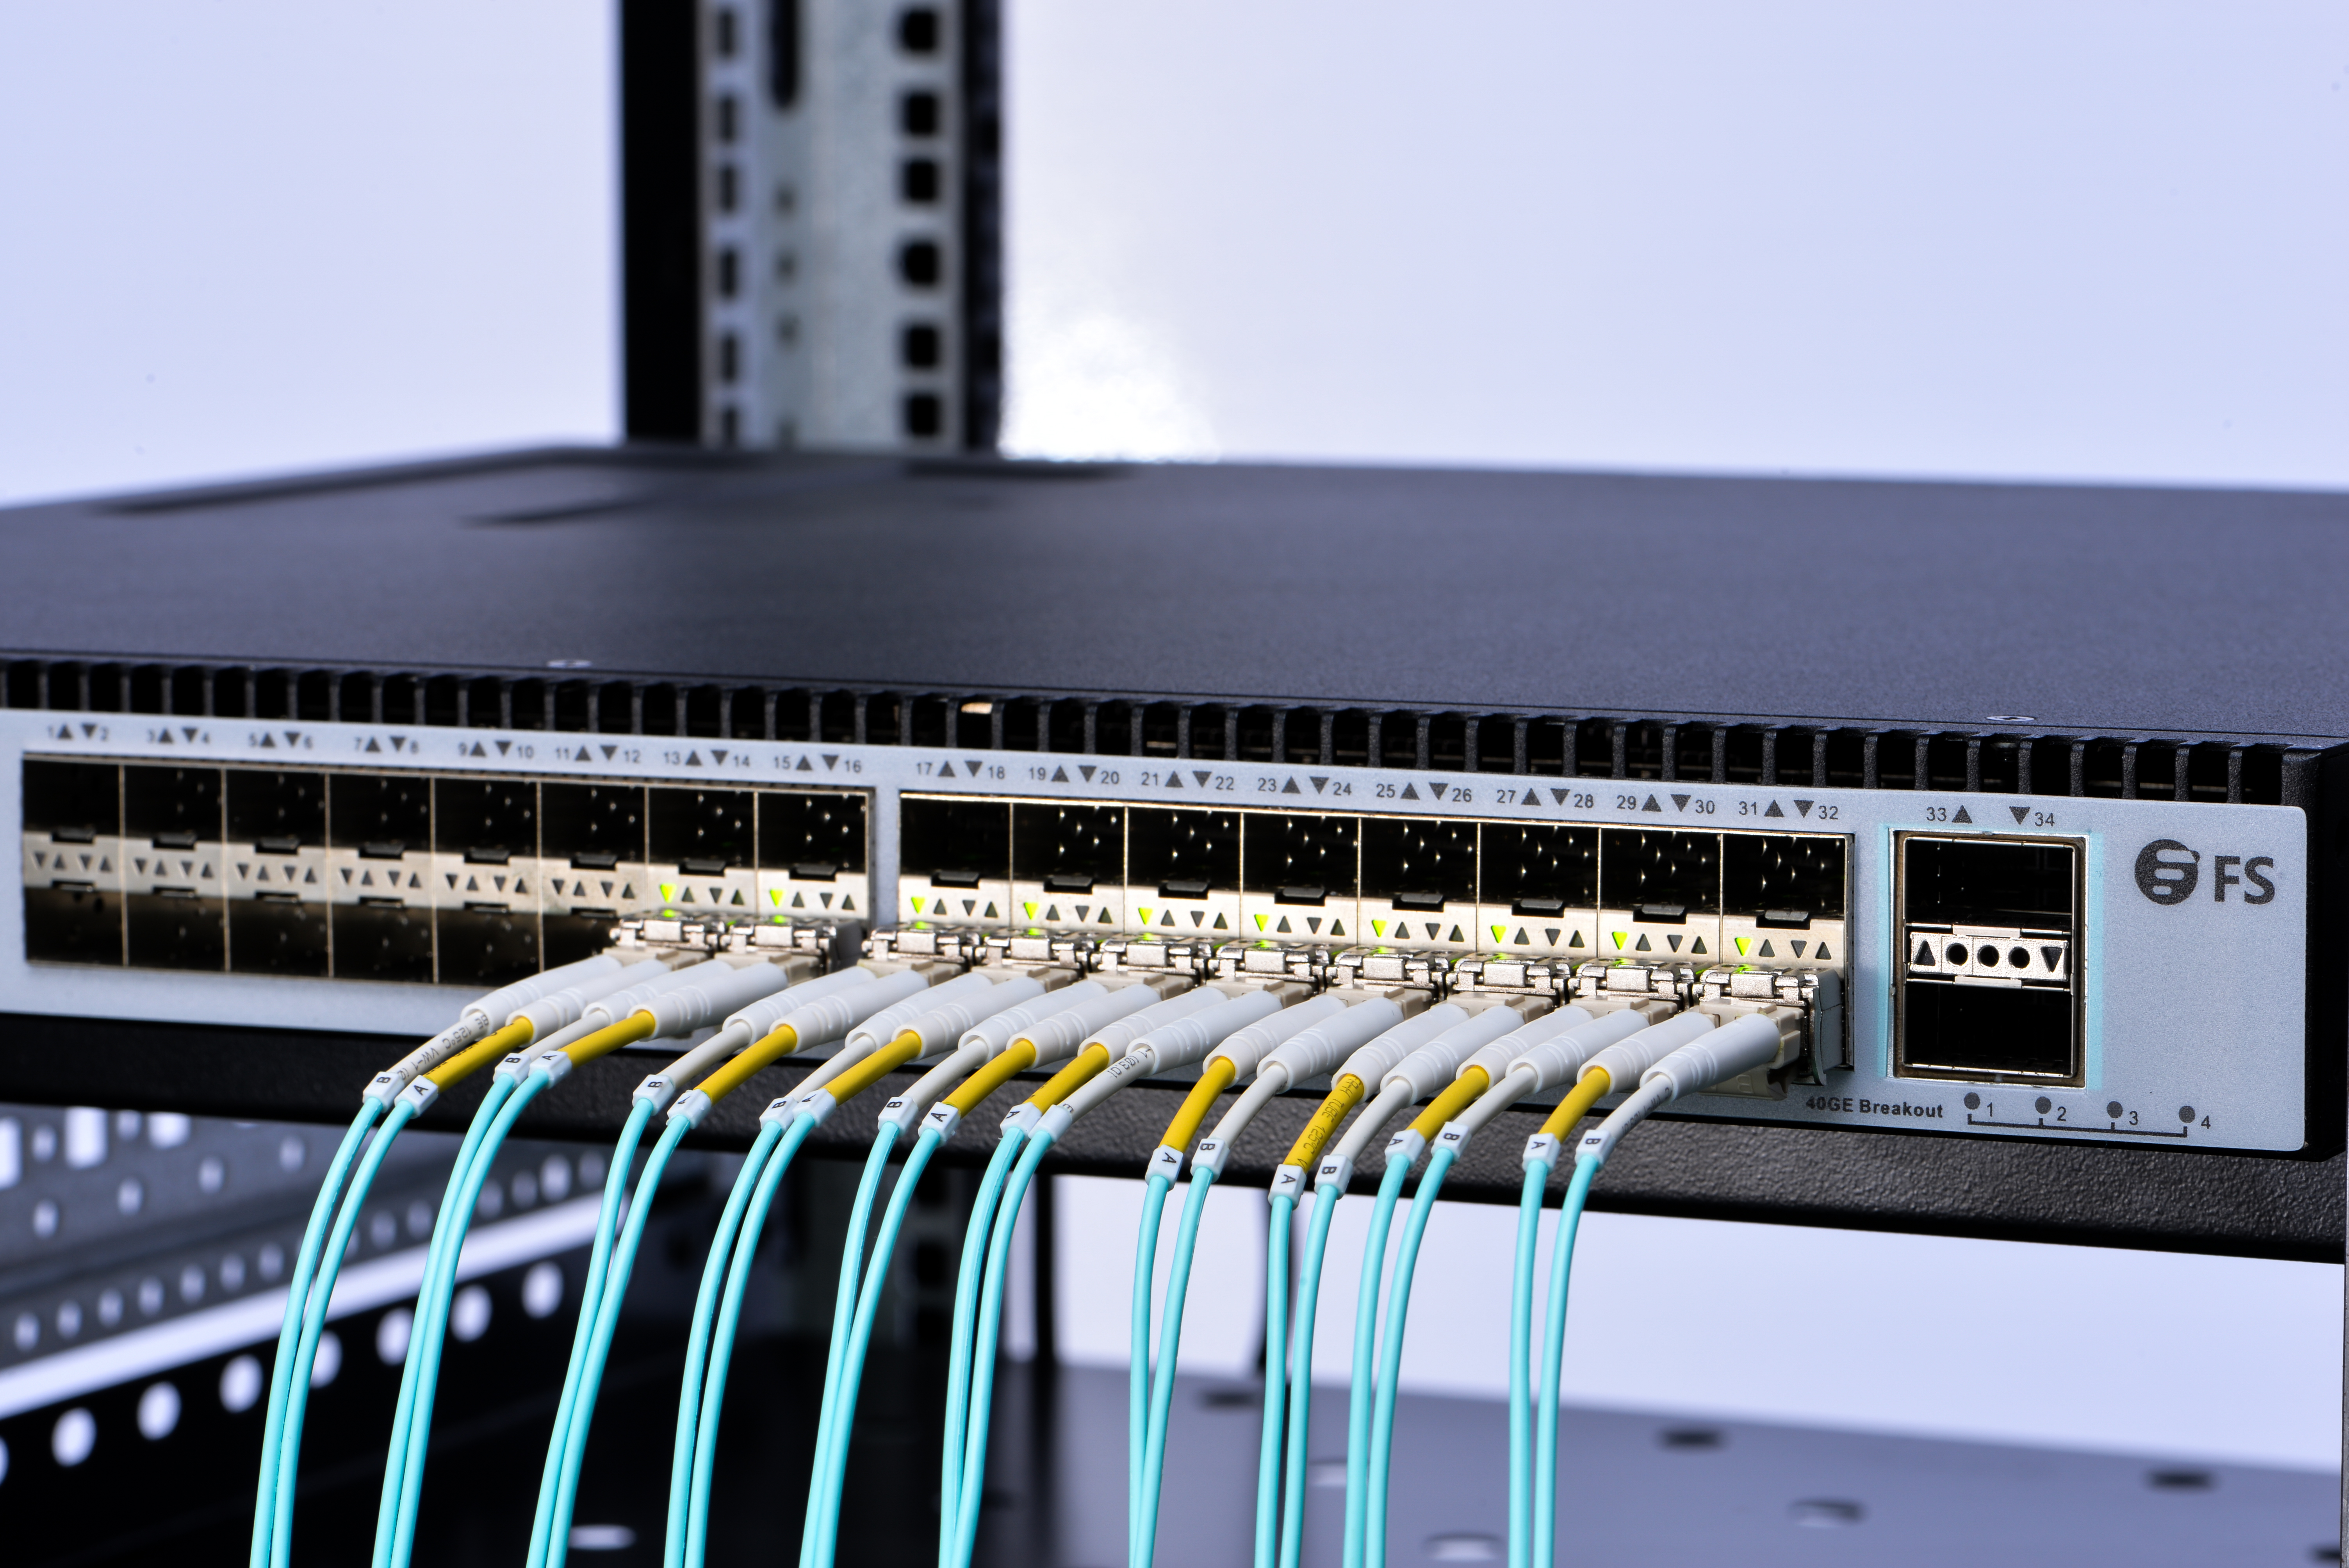 patch panel vs switch: network switch